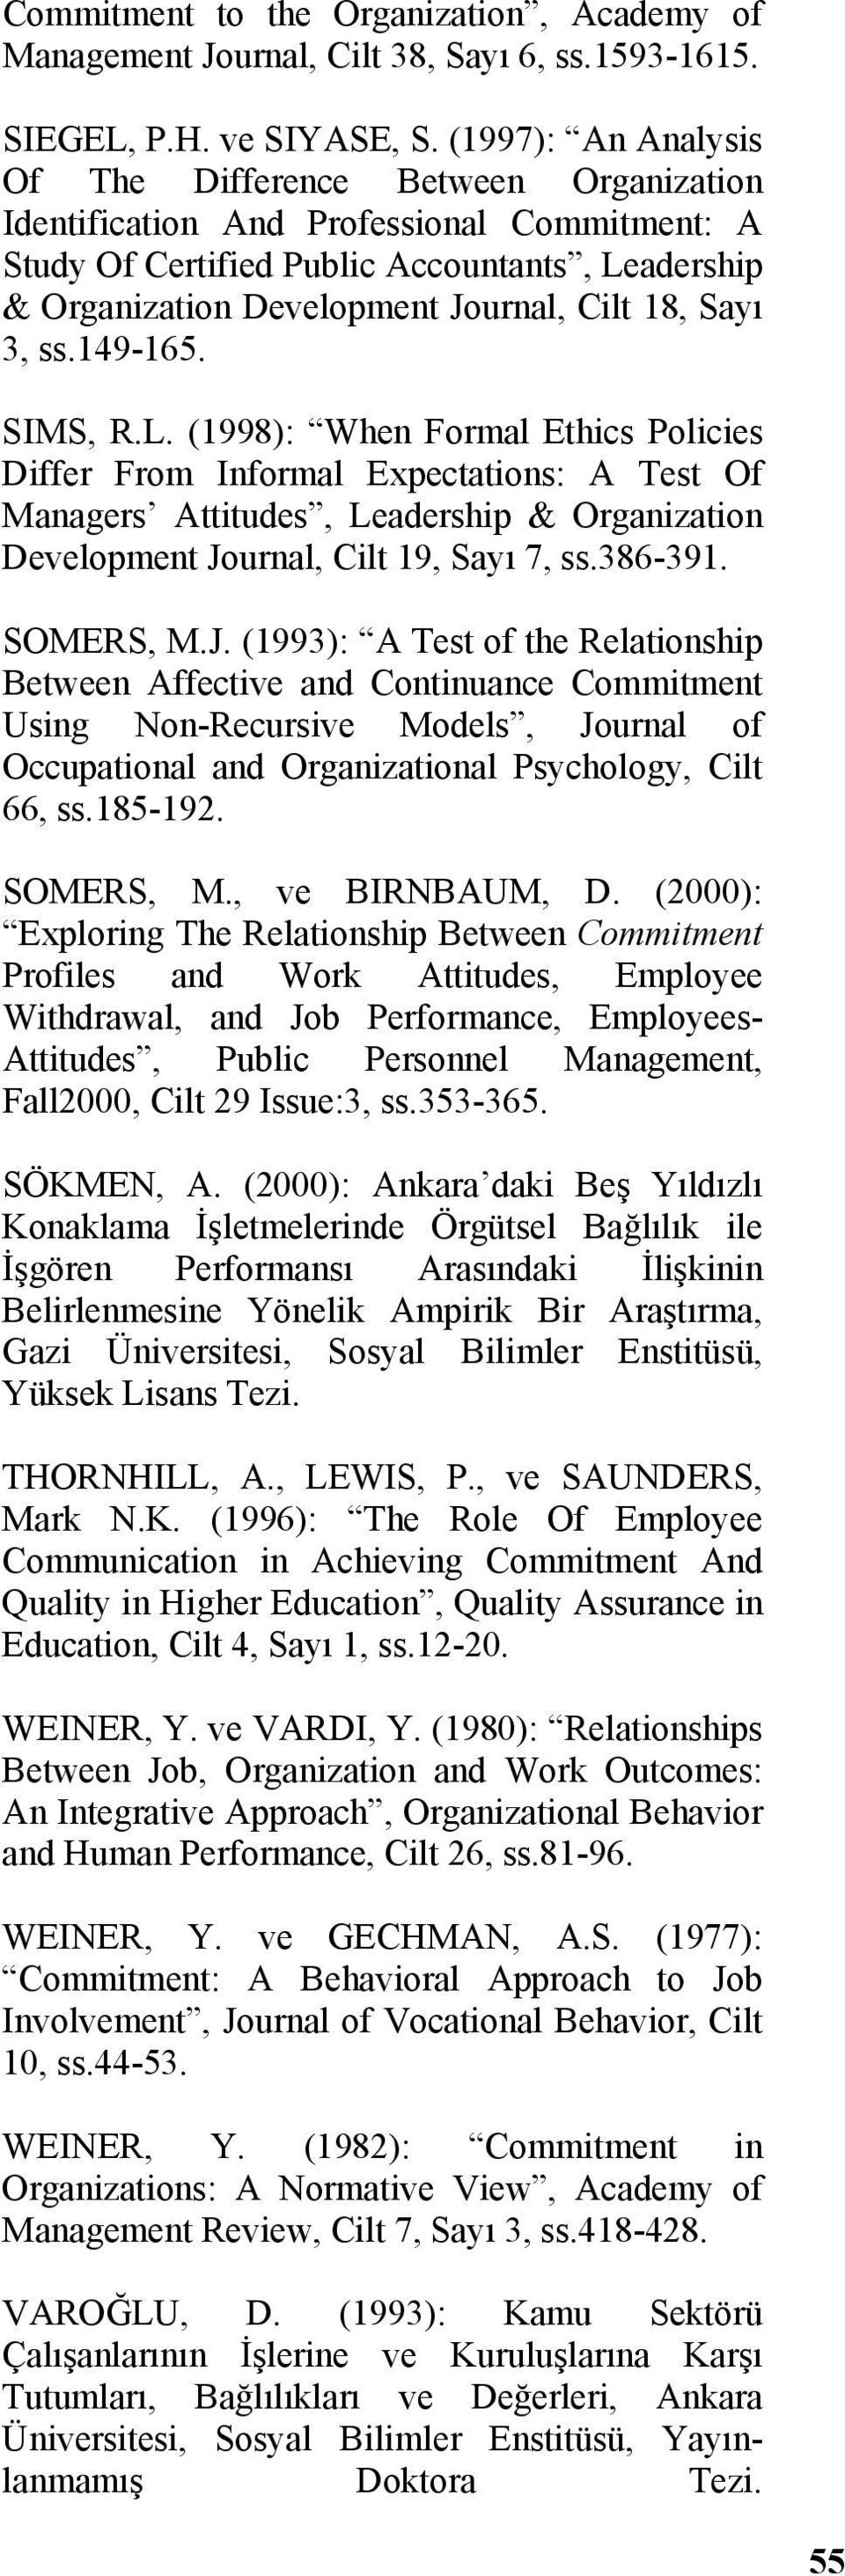 Sayı 3, ss.149-165. SIMS, R.L. (1998): When Formal Ethics Policies Differ From Informal Expectations: A Test Of Managers Attitudes, Leadership & Organization Development Journal, Cilt 19, Sayı 7, ss.